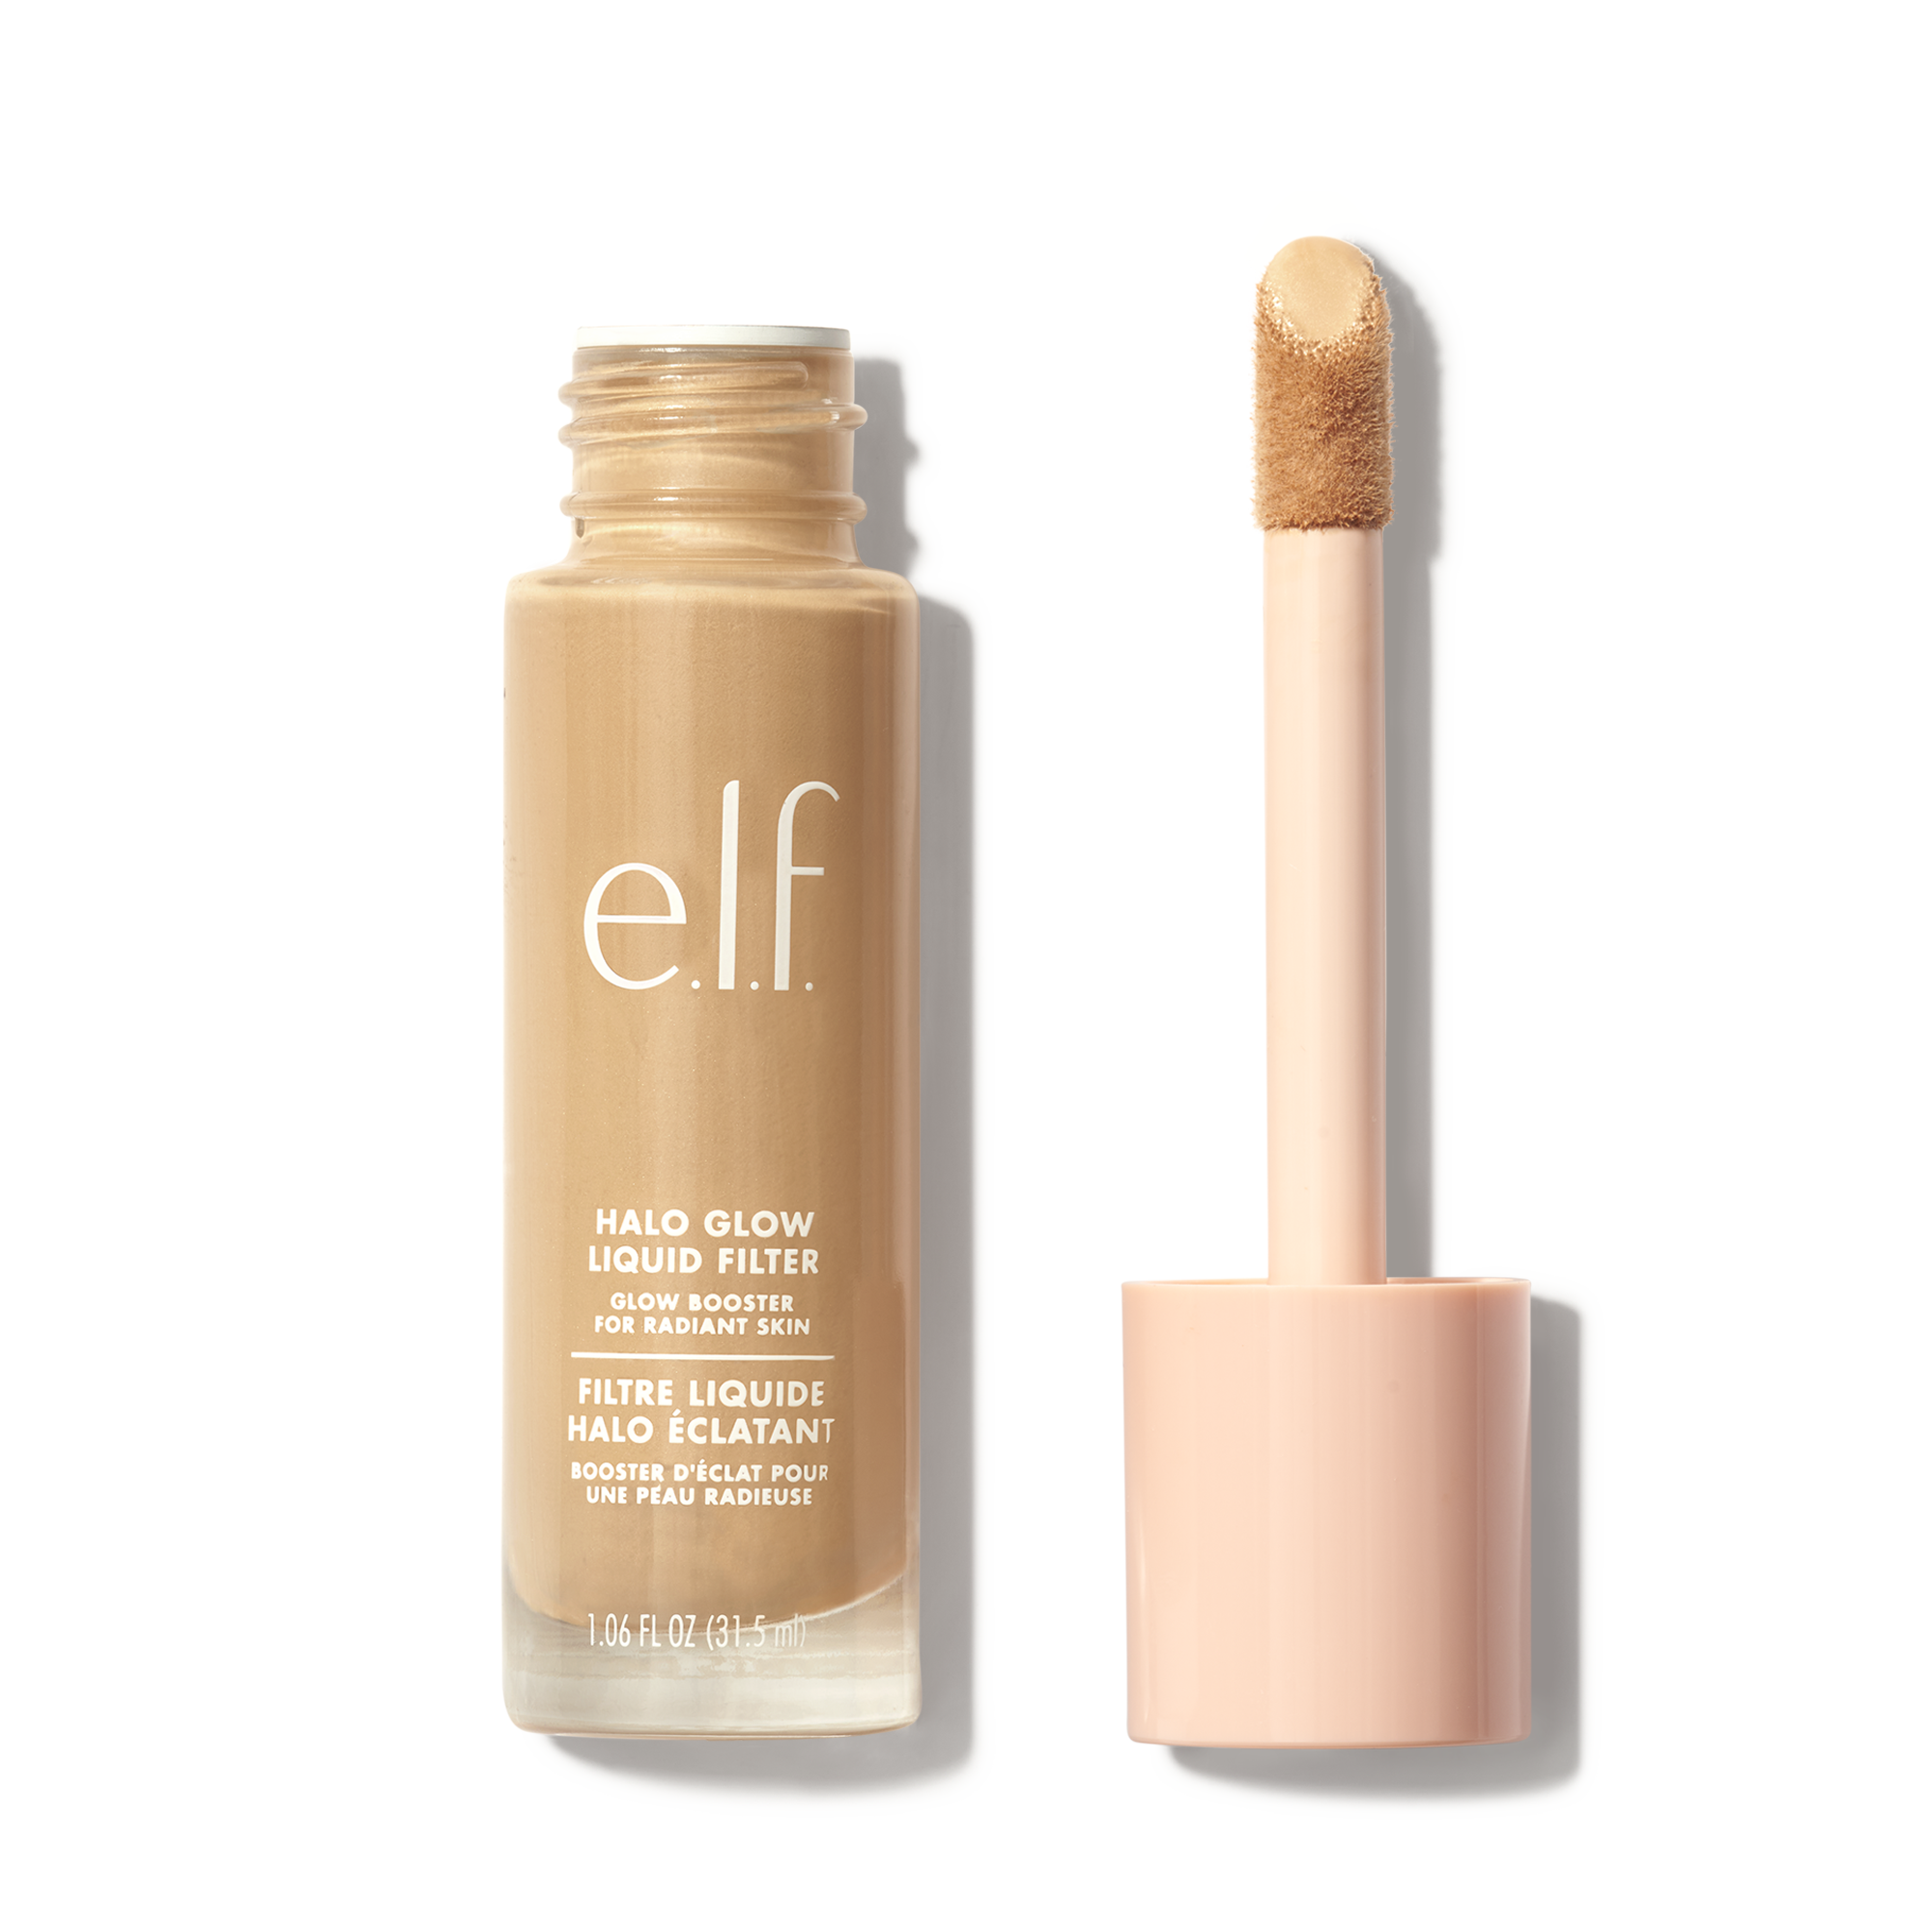 NEW ELF HALO GLOW LIQUID FILTER  *watch this if you have oily skin* 